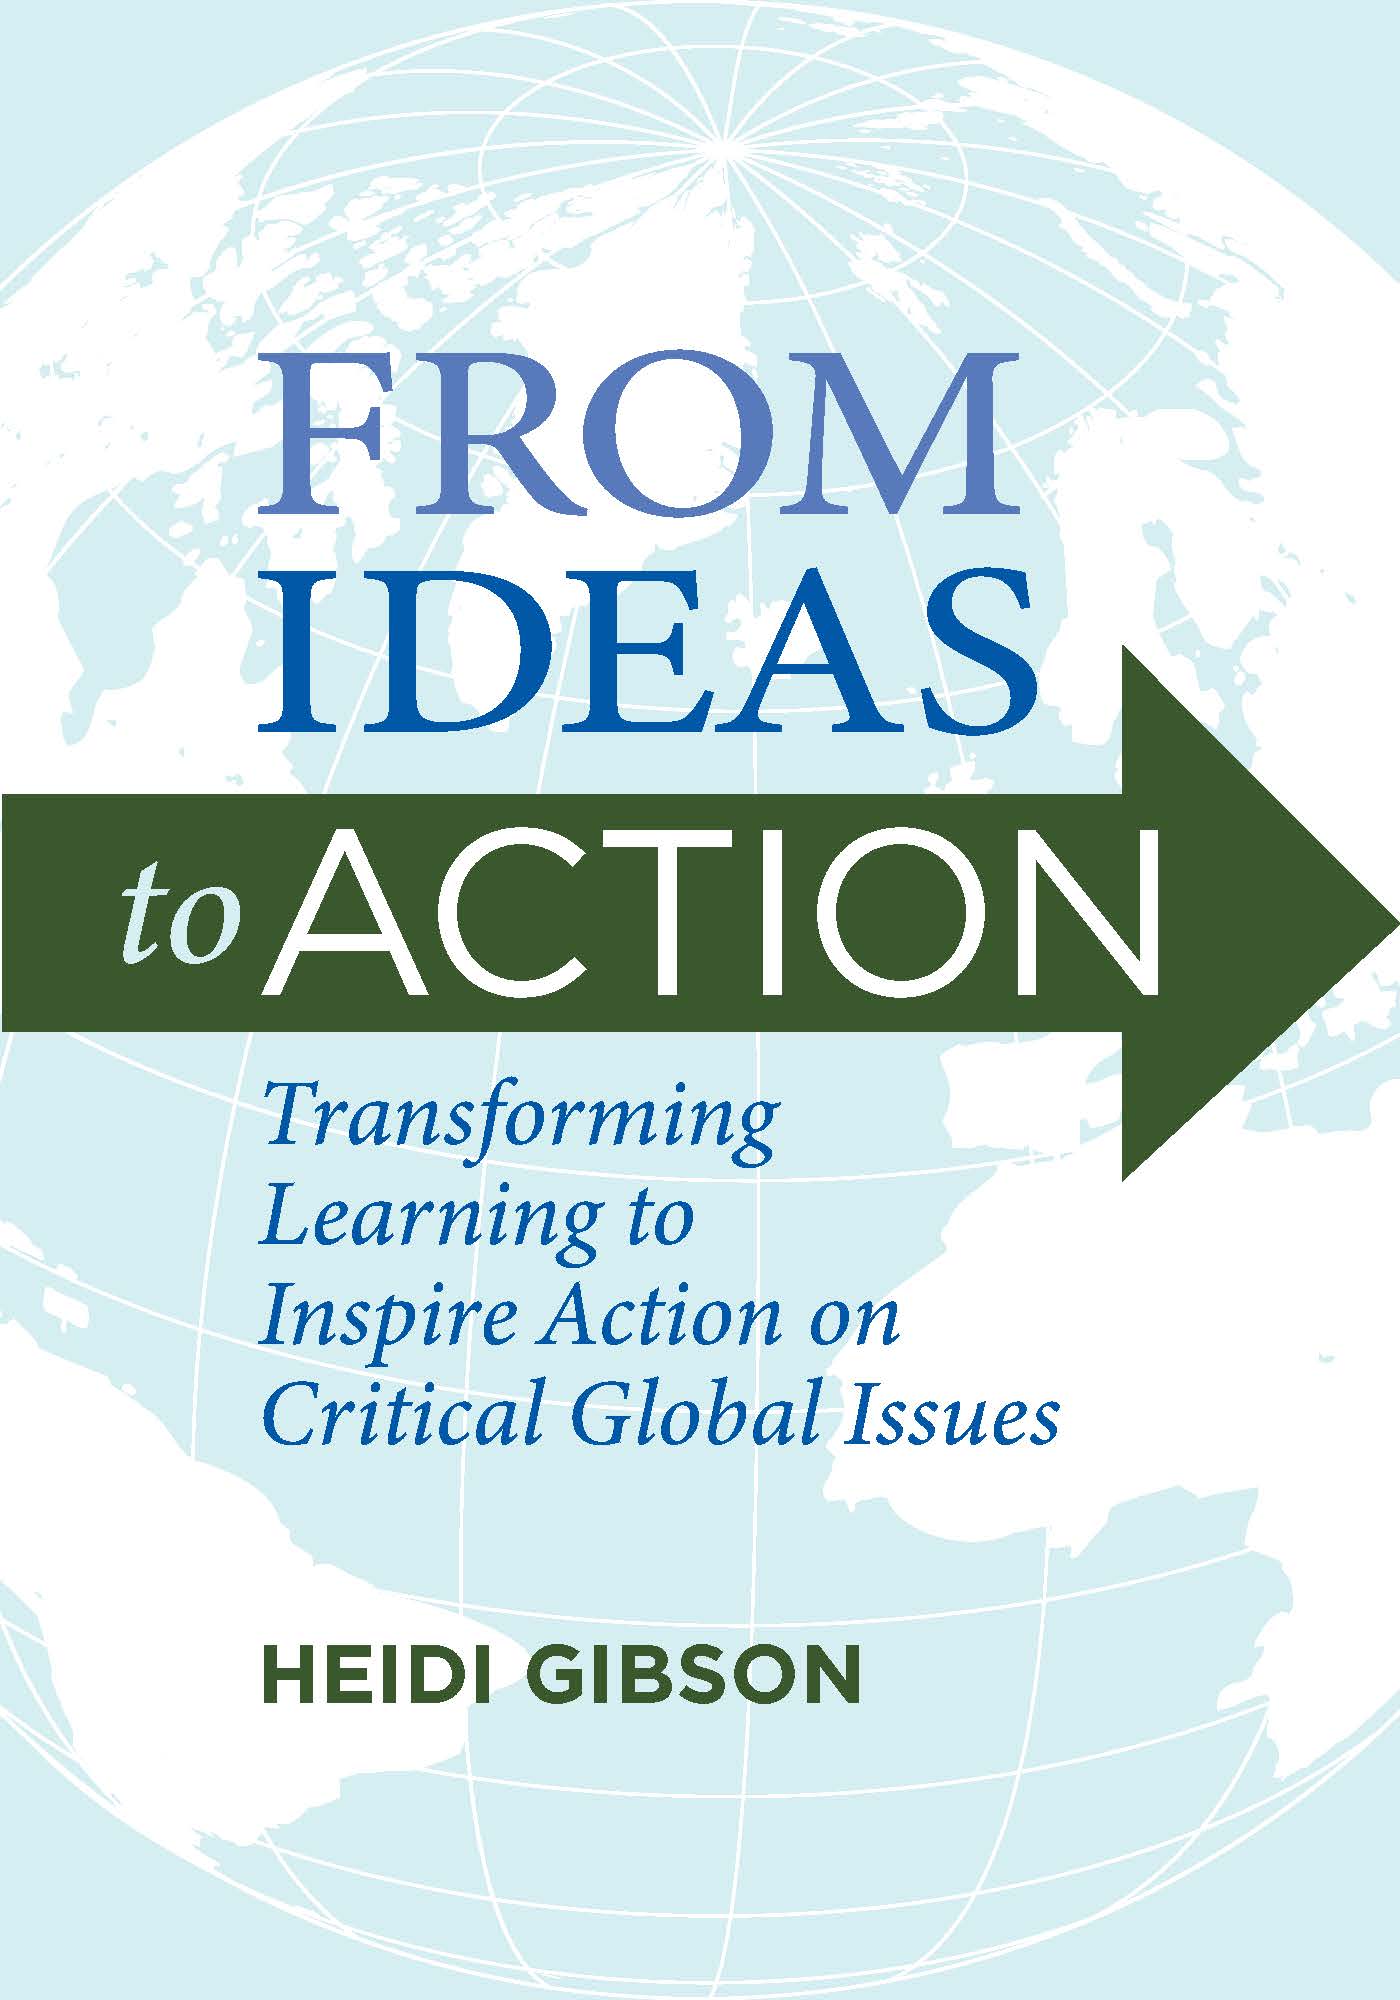 From Ideas to Action: Transforming Learning to Inspire Action on Critical Global Issues